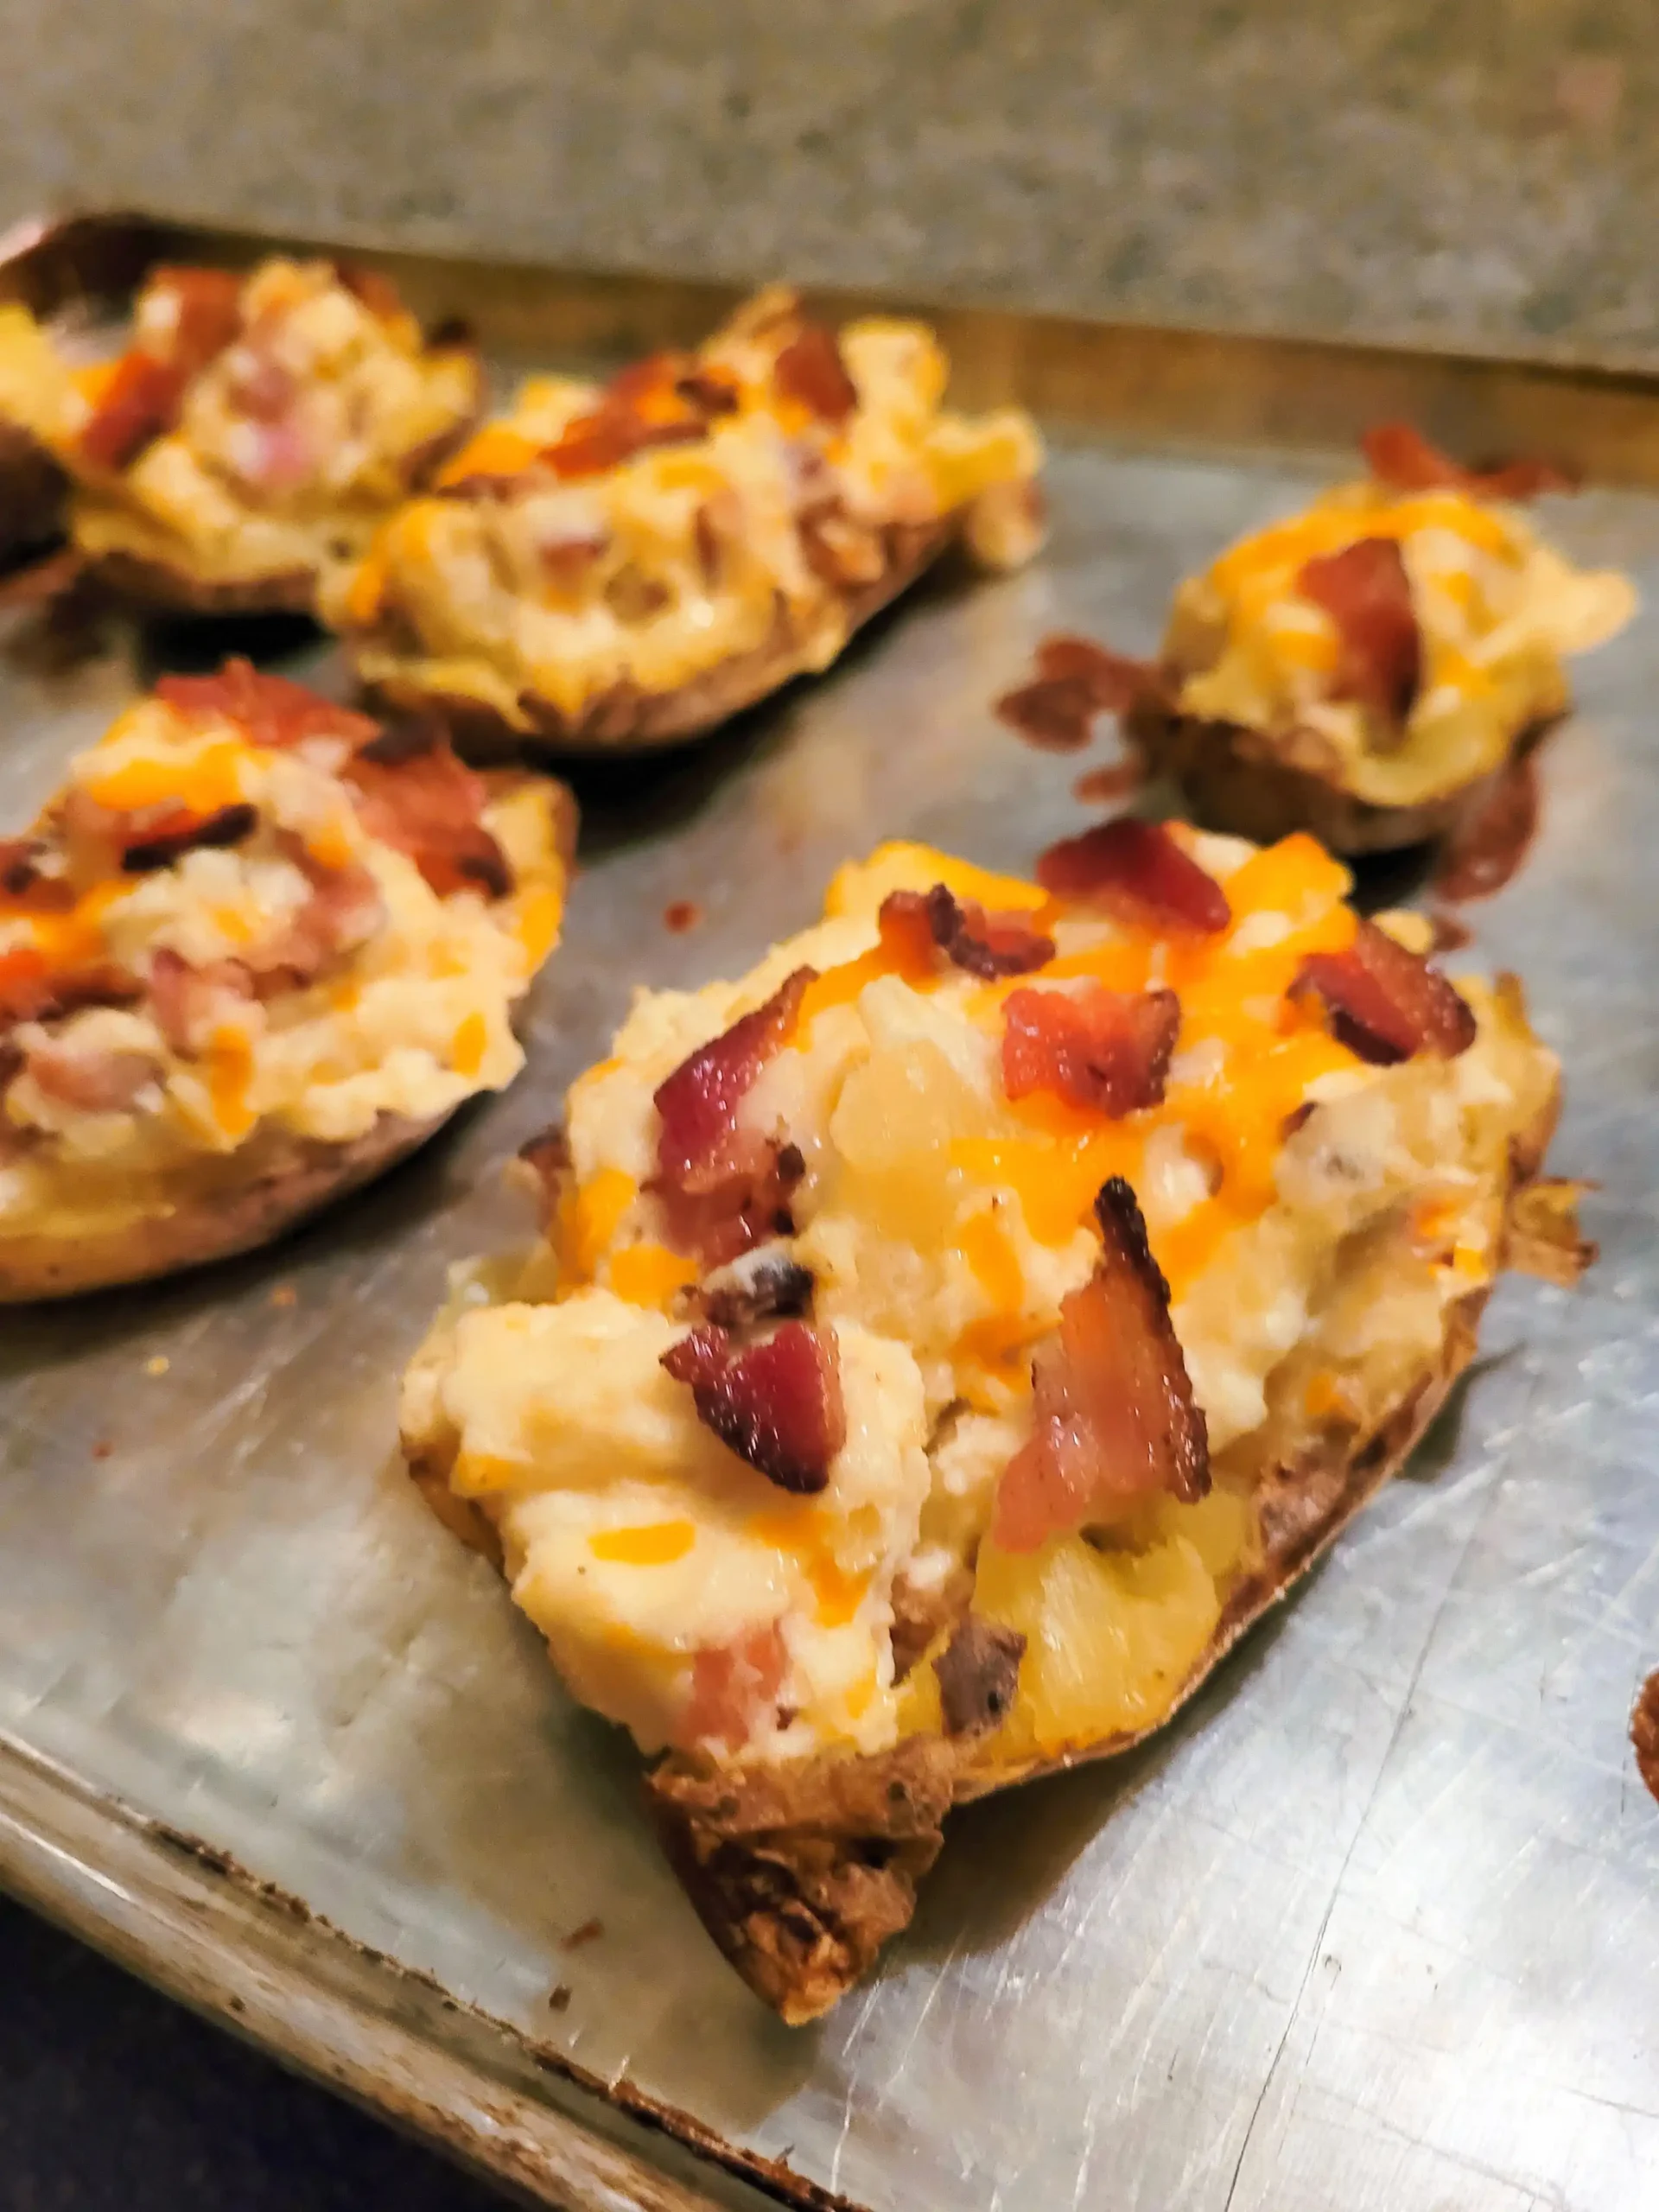 twice baked potatoes with toppings.